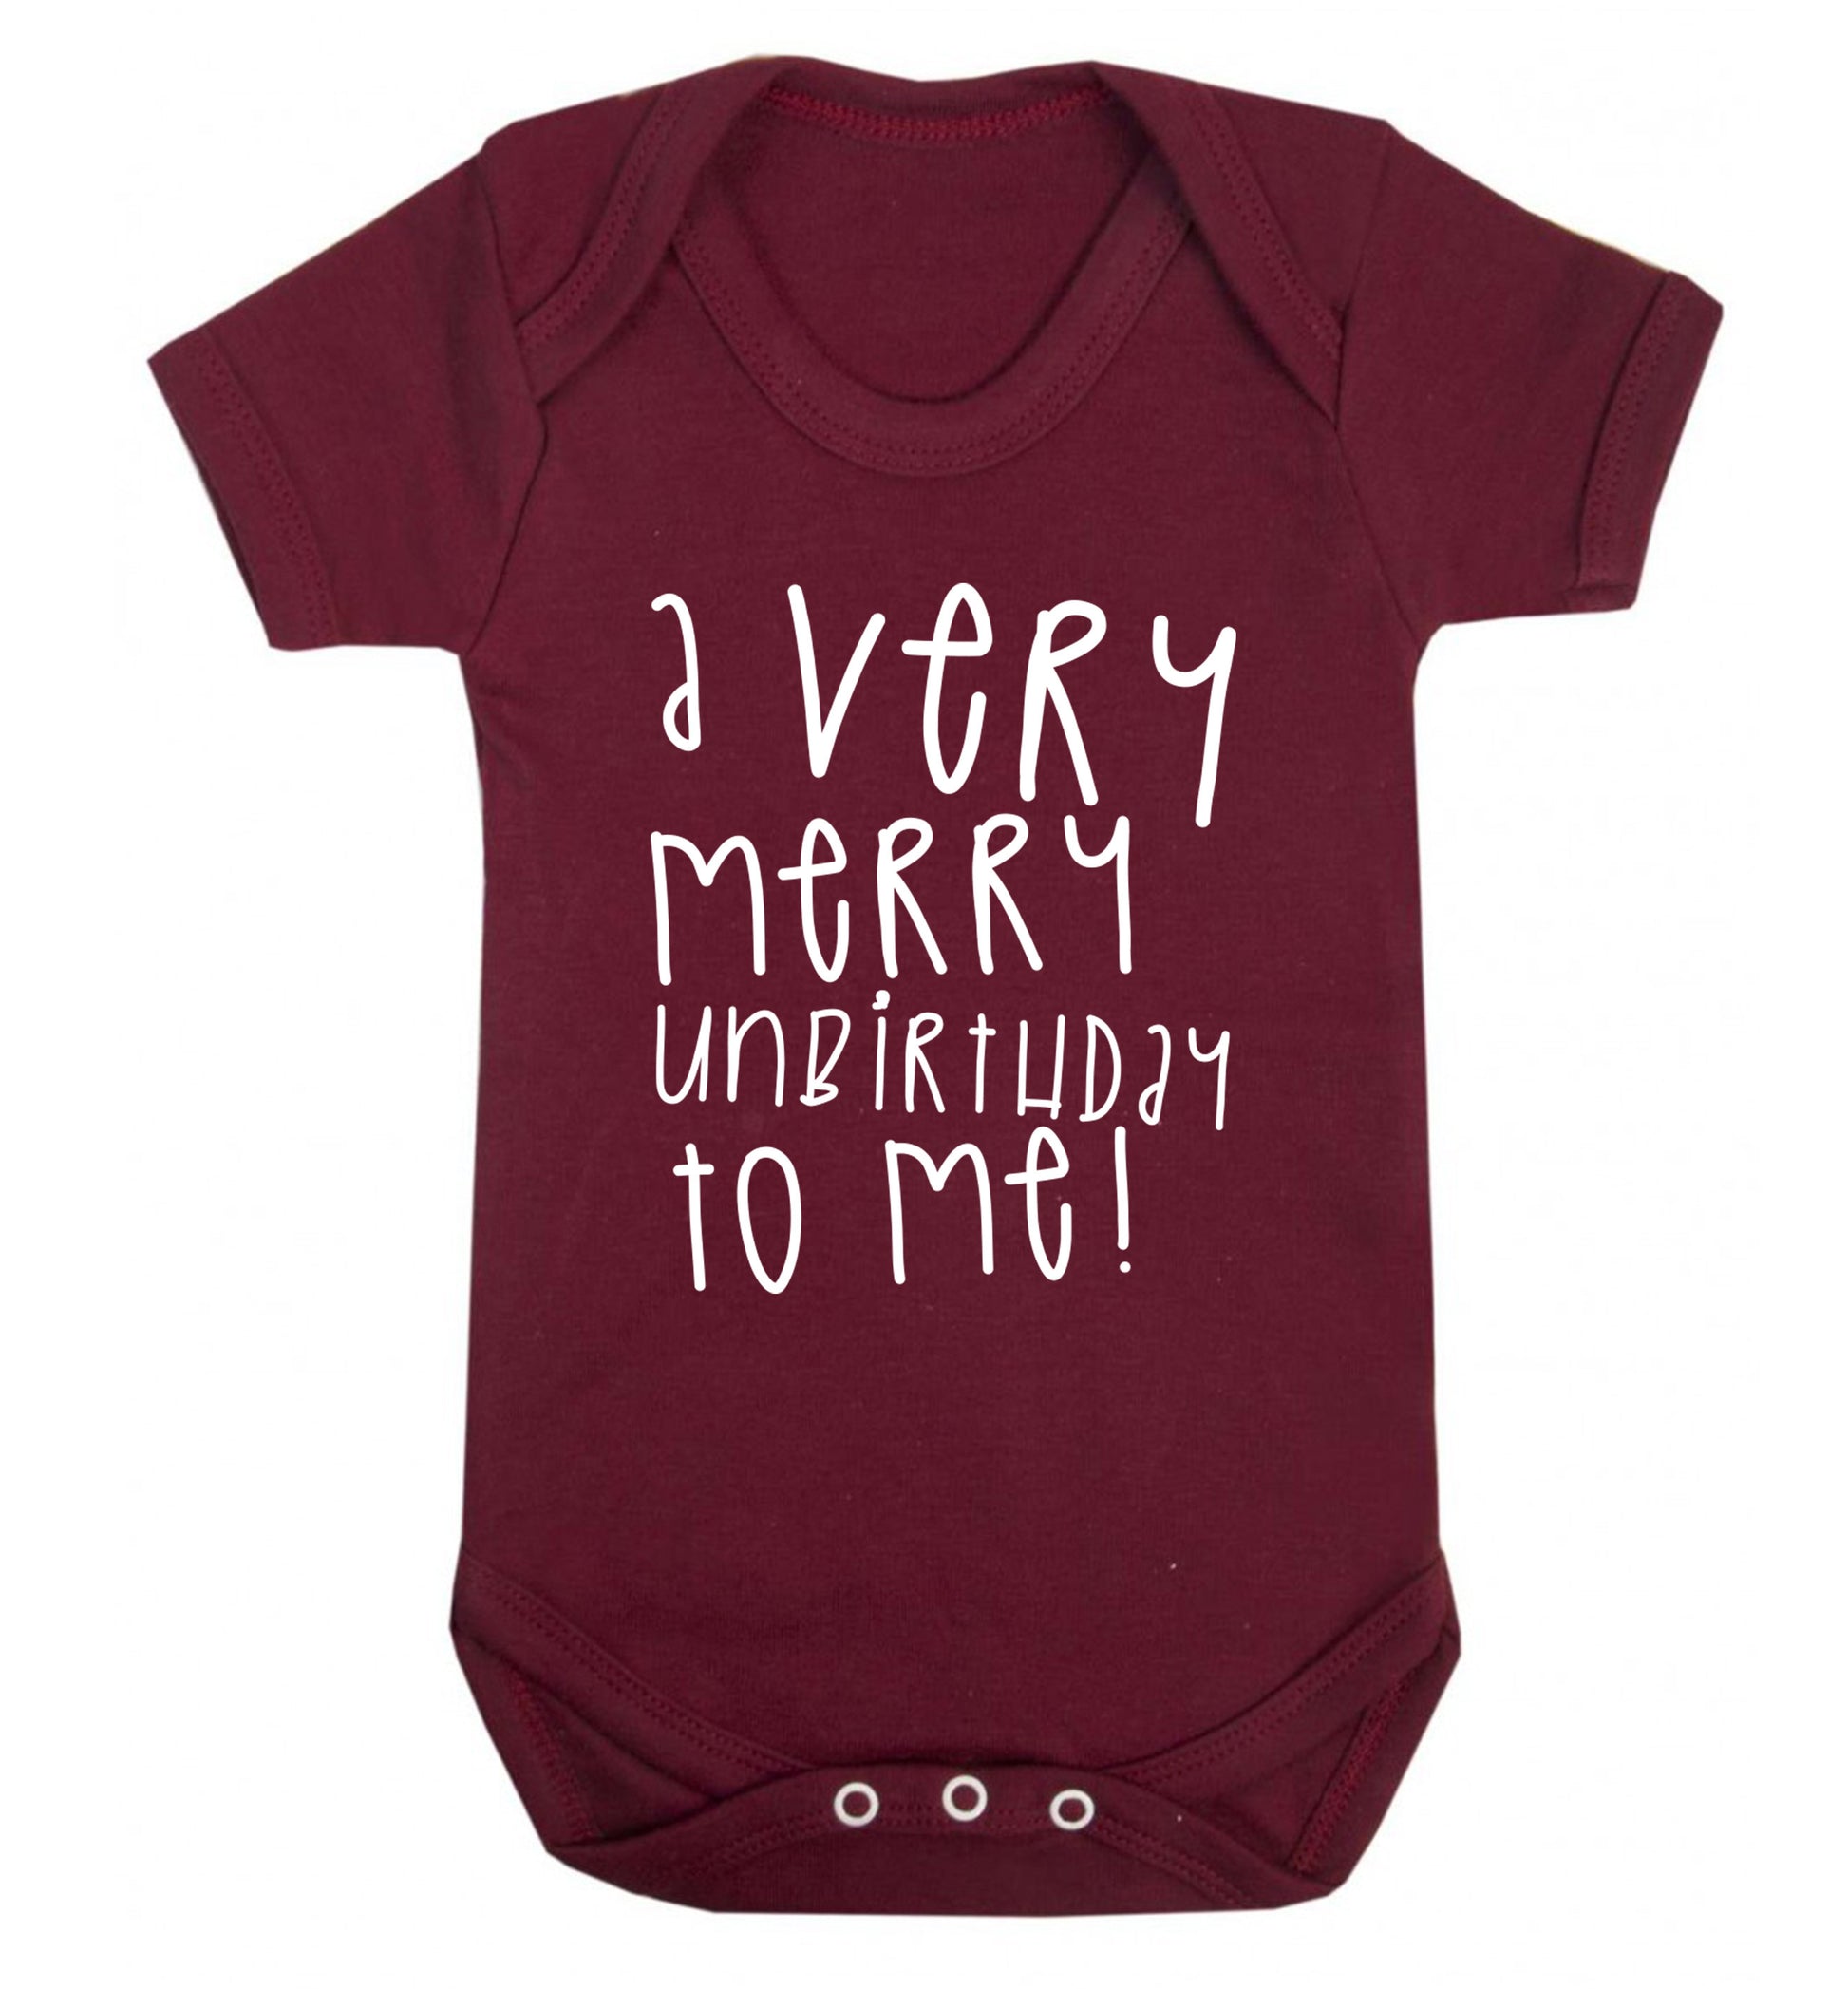 A very merry unbirthday to me! Baby Vest maroon 18-24 months